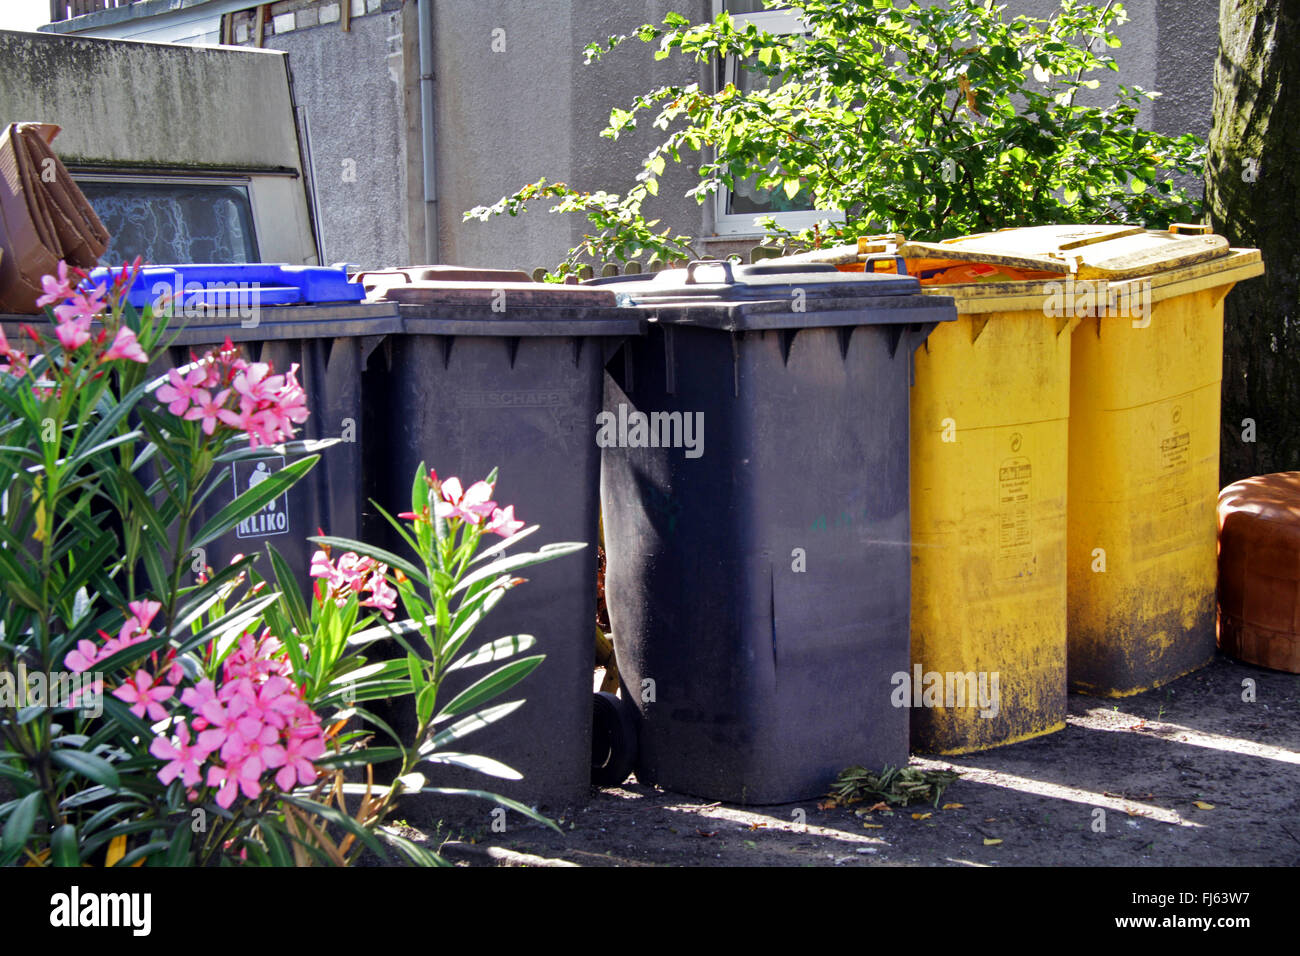 different trashbins for residual waste and recycling bins, Germany Stock Photo